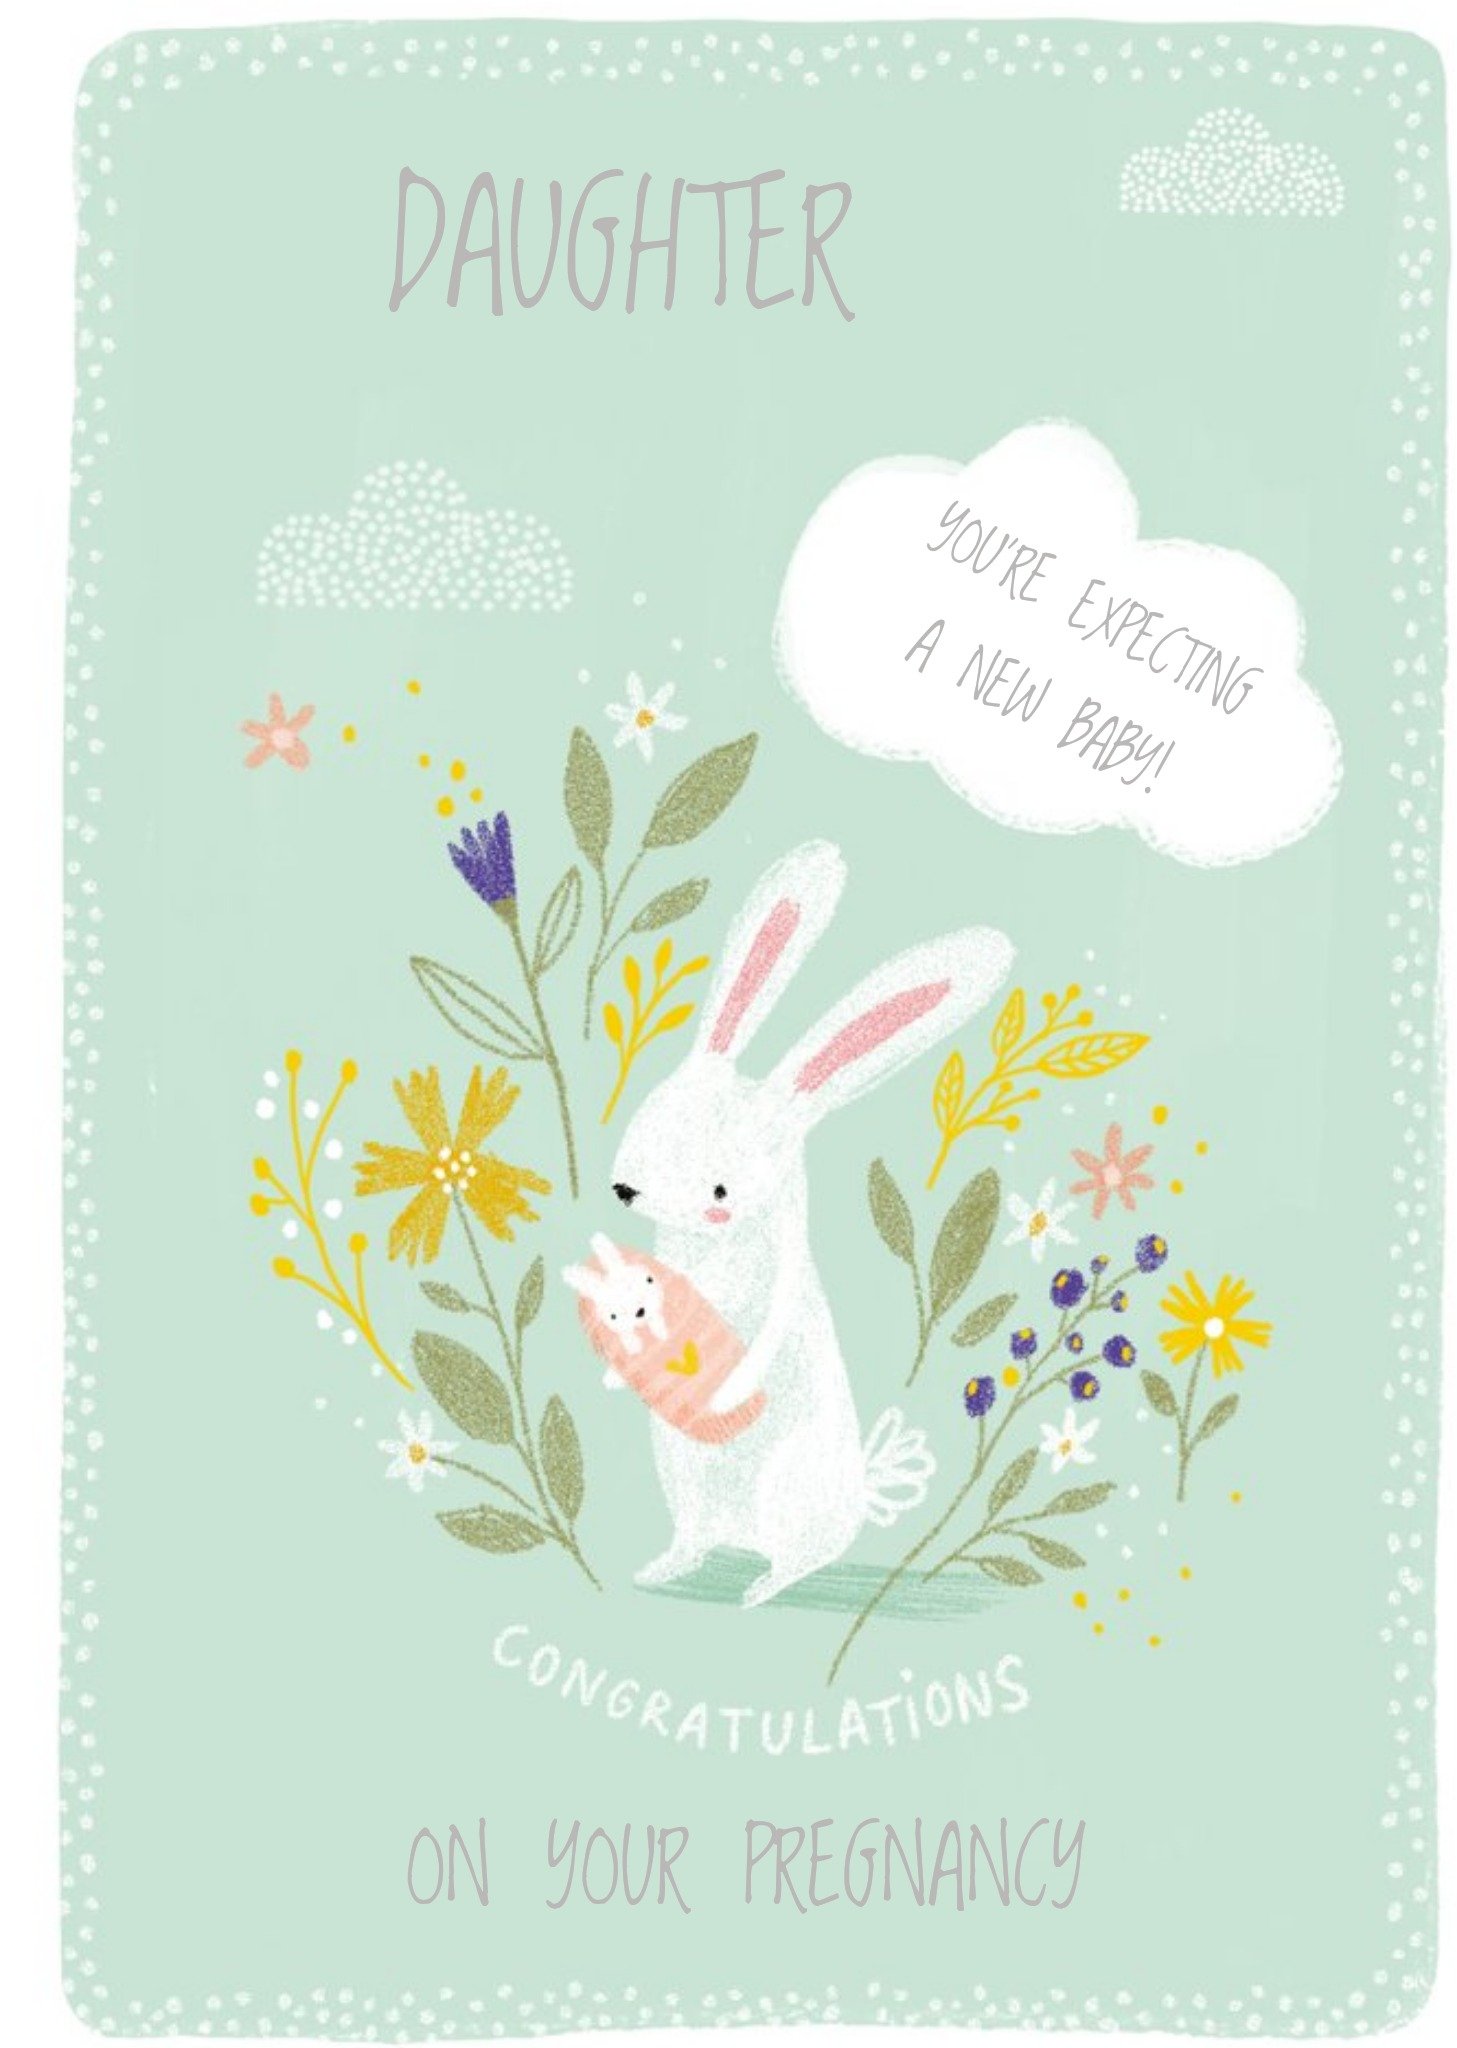 Ling Design Congratulations You're Expecting A Baby Pregnancy Card For Daughter Ecard